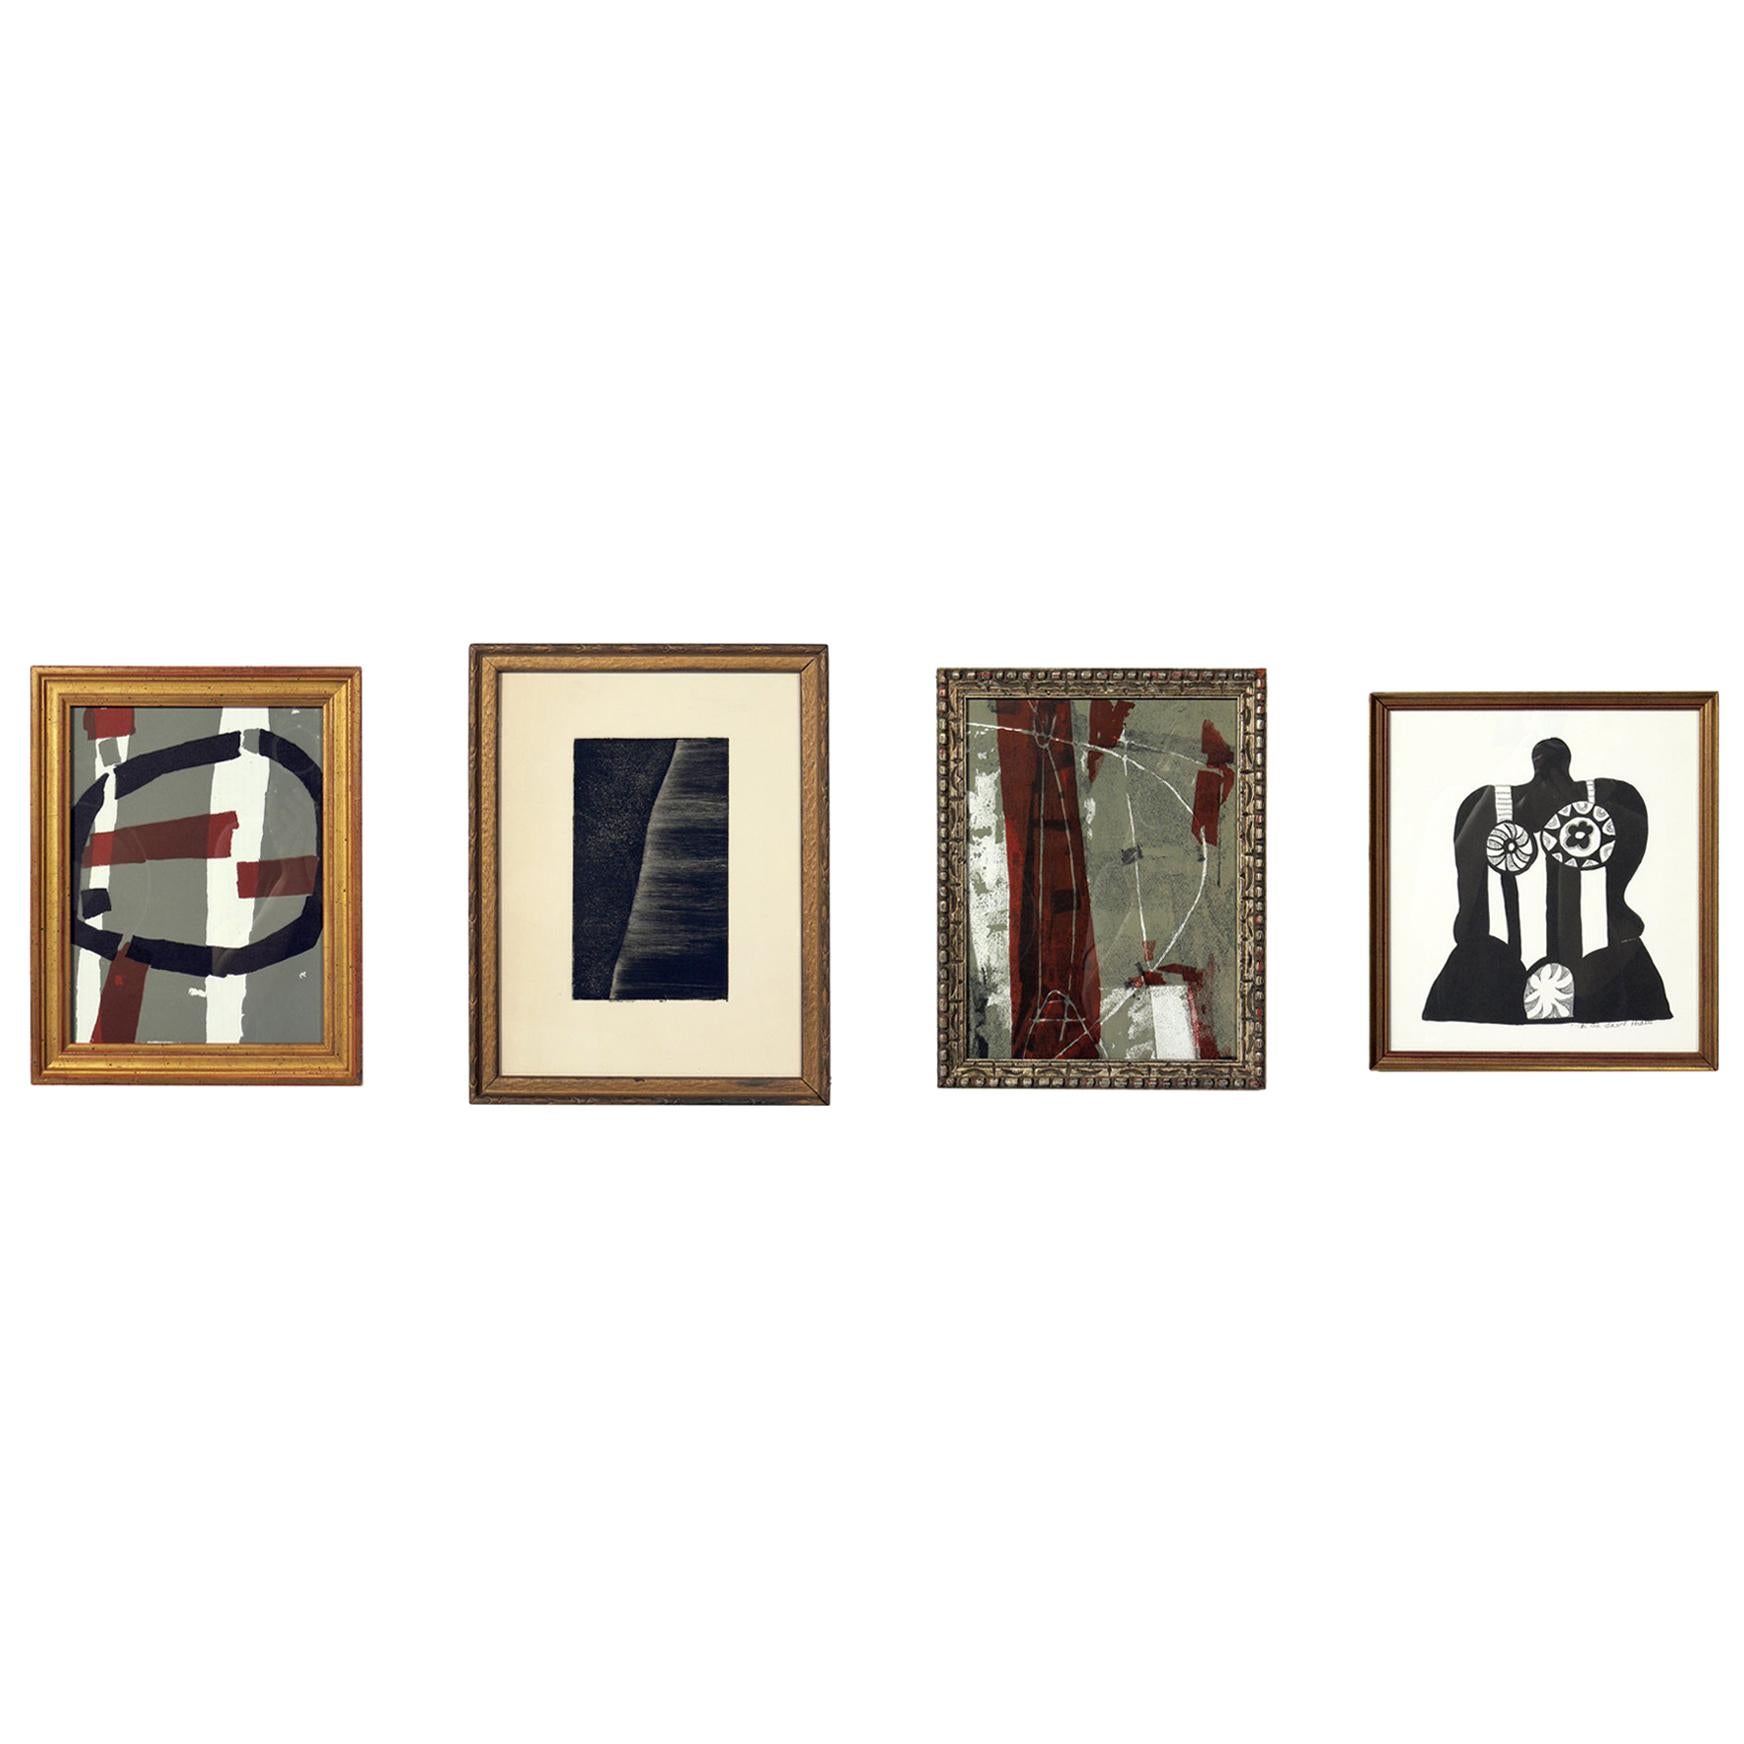 Selection of Abstract Modern Lithographs or Gallery Wall